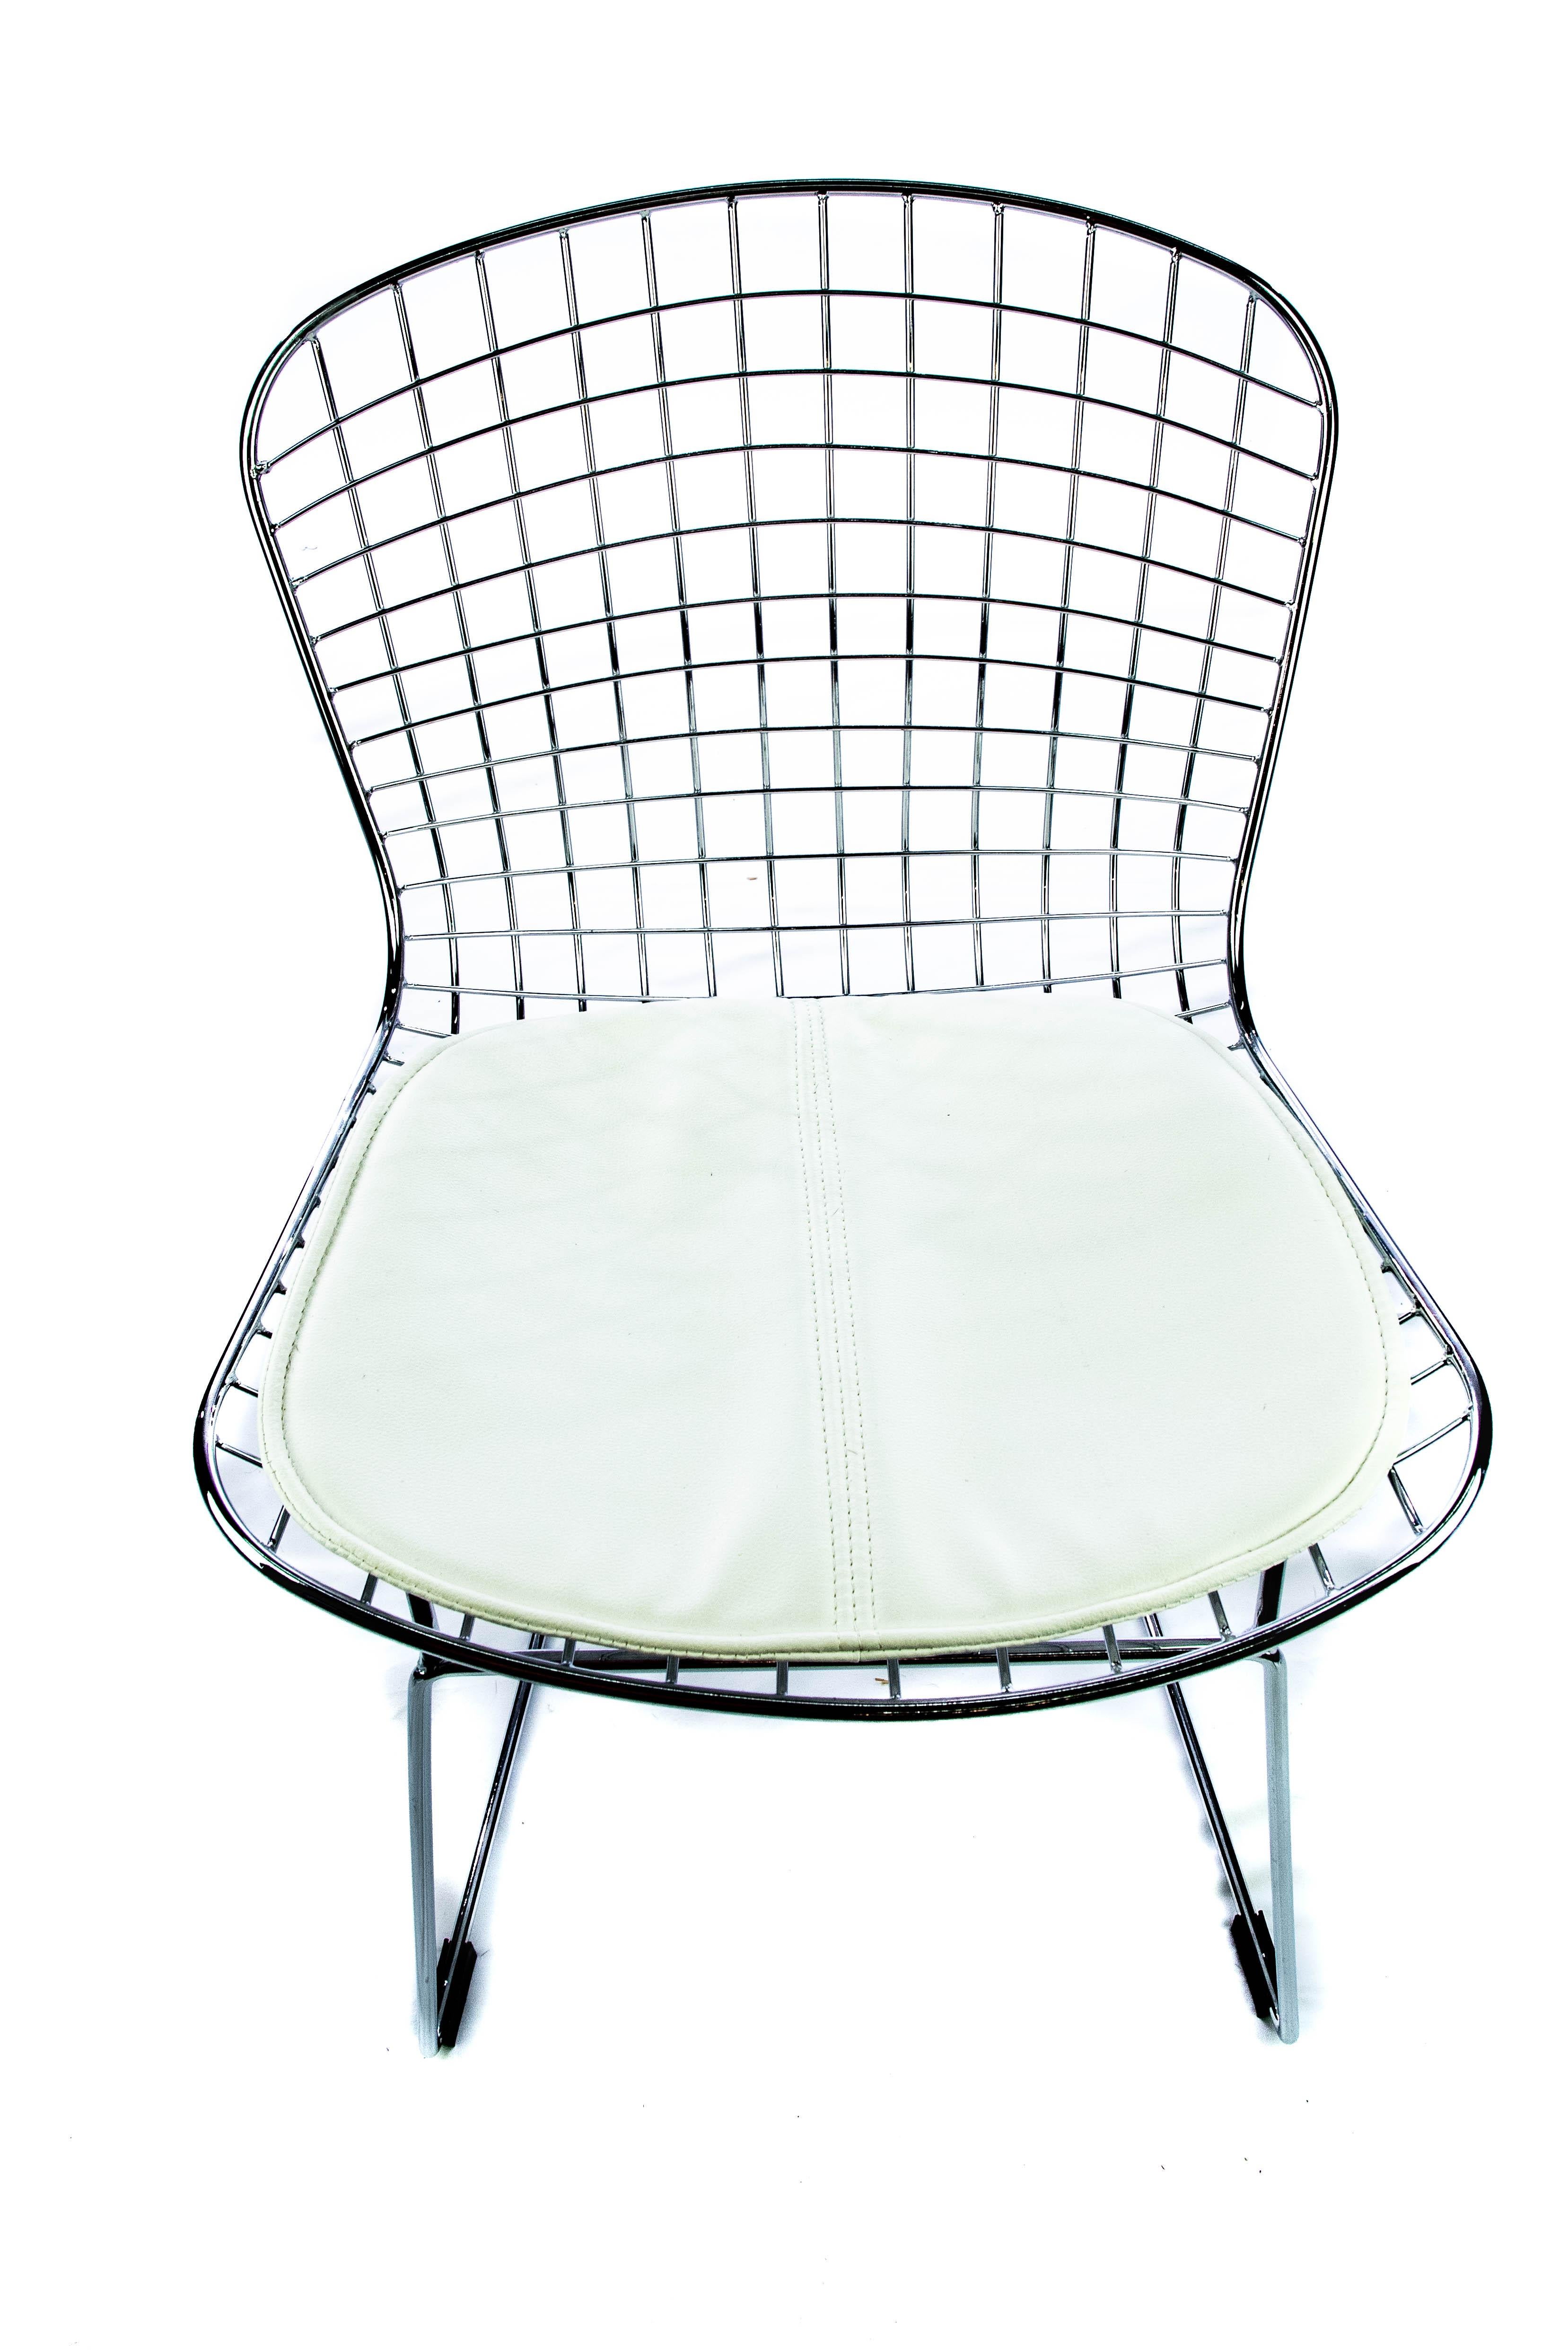 Enjoy the airy, simplicity of the modern chrome mesh chair in the style of Betoria. Built with a solid chrome steel frame, this chair features a wide, curved back with a grid design that is geometric. The seat of the chair features an appealing